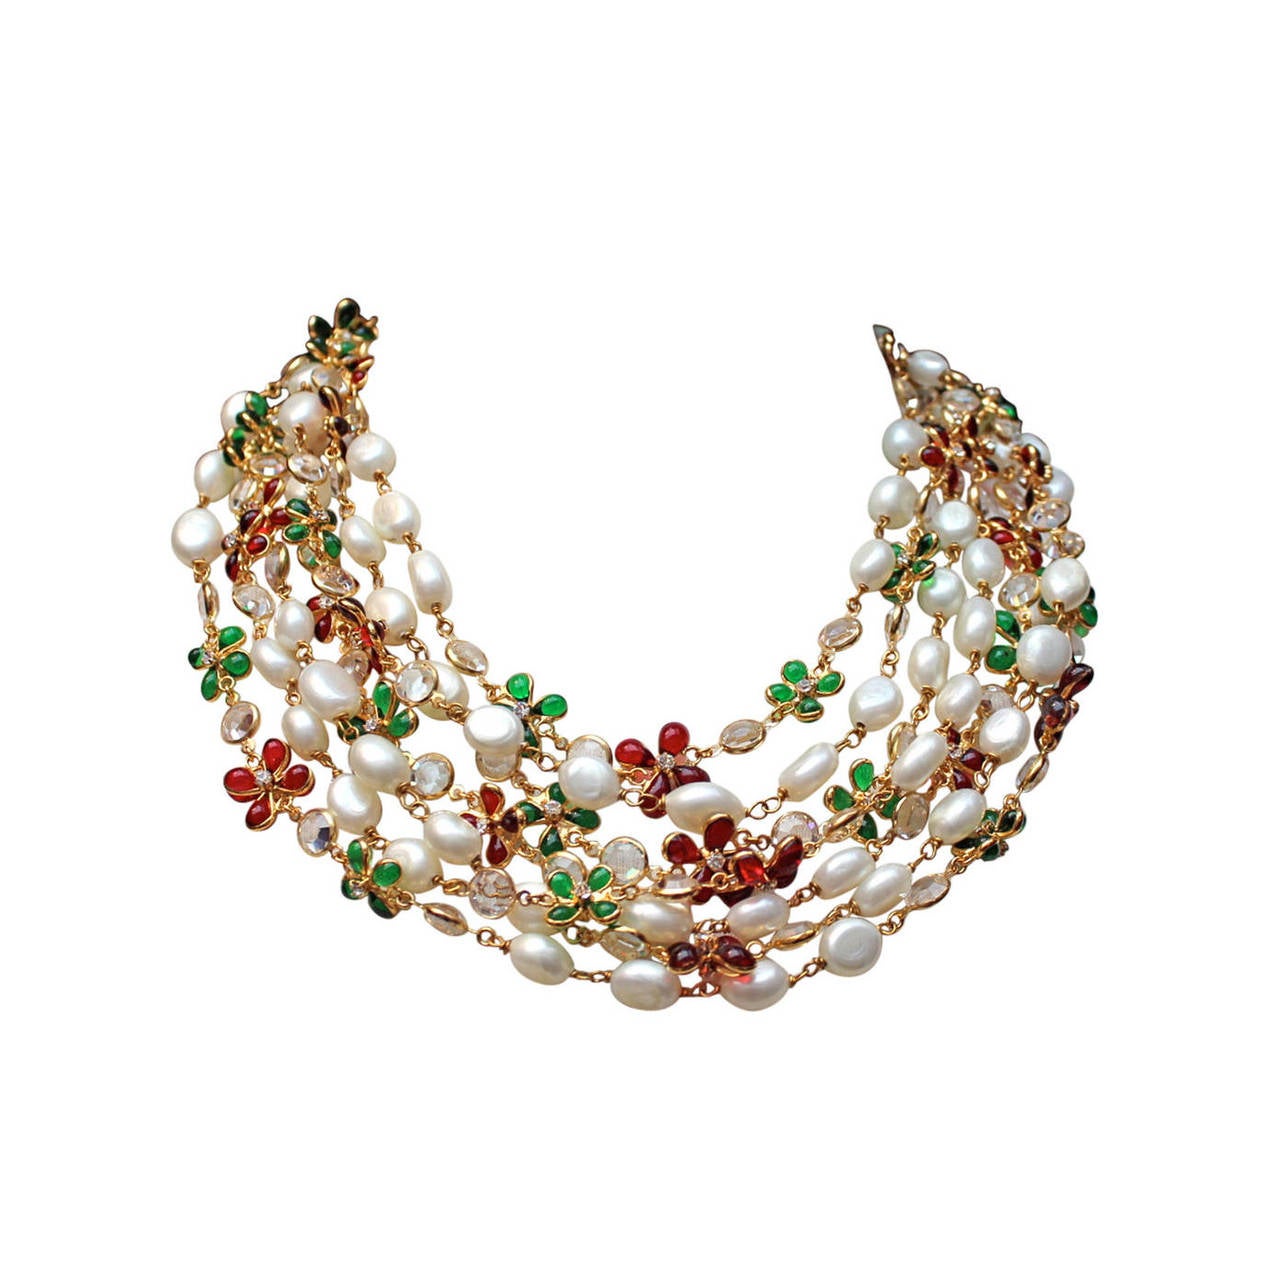 Red and Green Gripoix Glass with Pearls Multi Strand Necklace by Chanel, 1990s For Sale